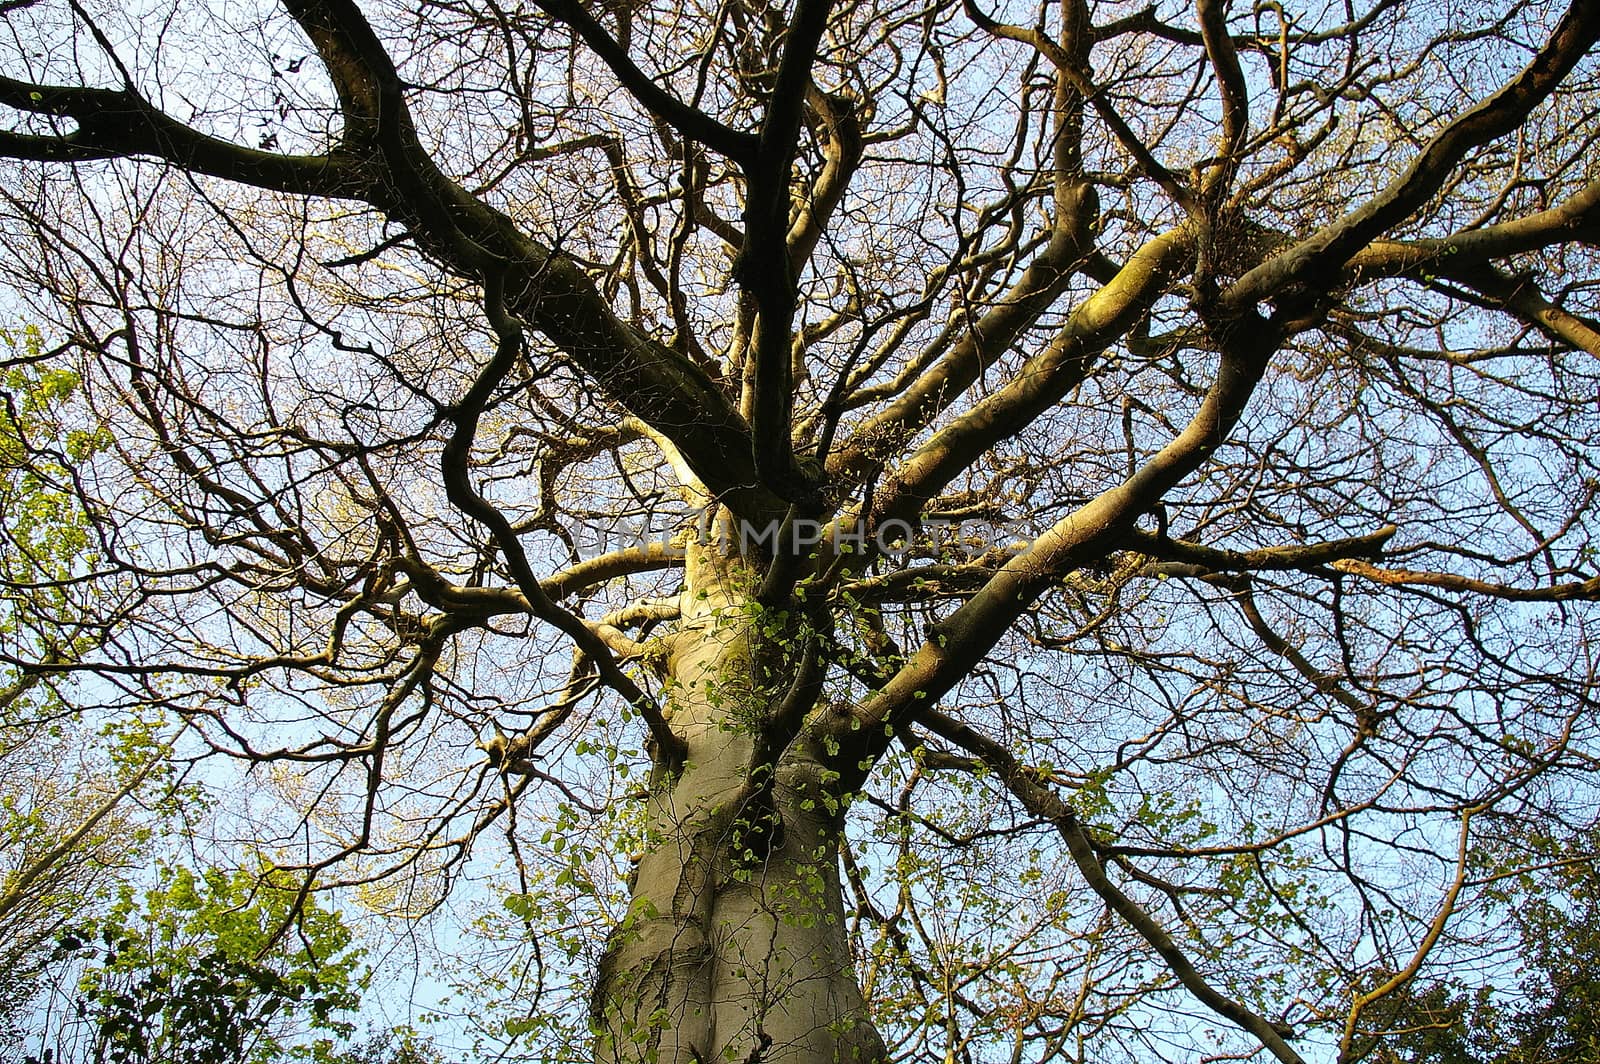 Looking up through the bare branches of a tree into the sky